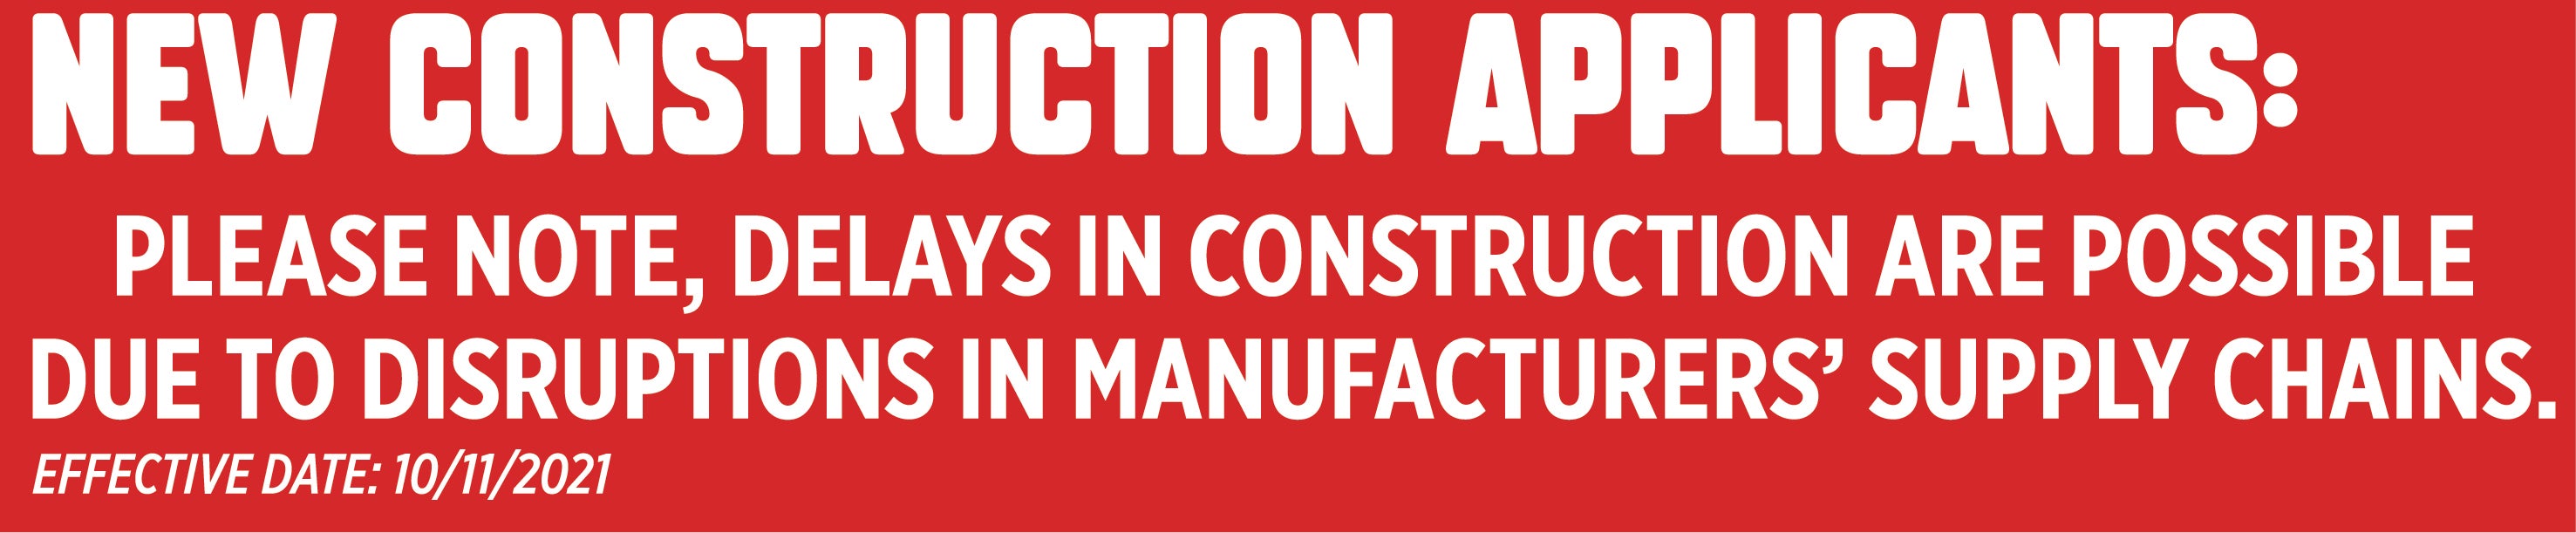 NEW CONSTRUCTION APPLICANTS: PLEASE NOTE: DELAYS IN CONSTRUCTION ARE POSSIBLE DUE TO DISRUPTIONS IN MANUFACTURERS’ SUPPLY CHAINS